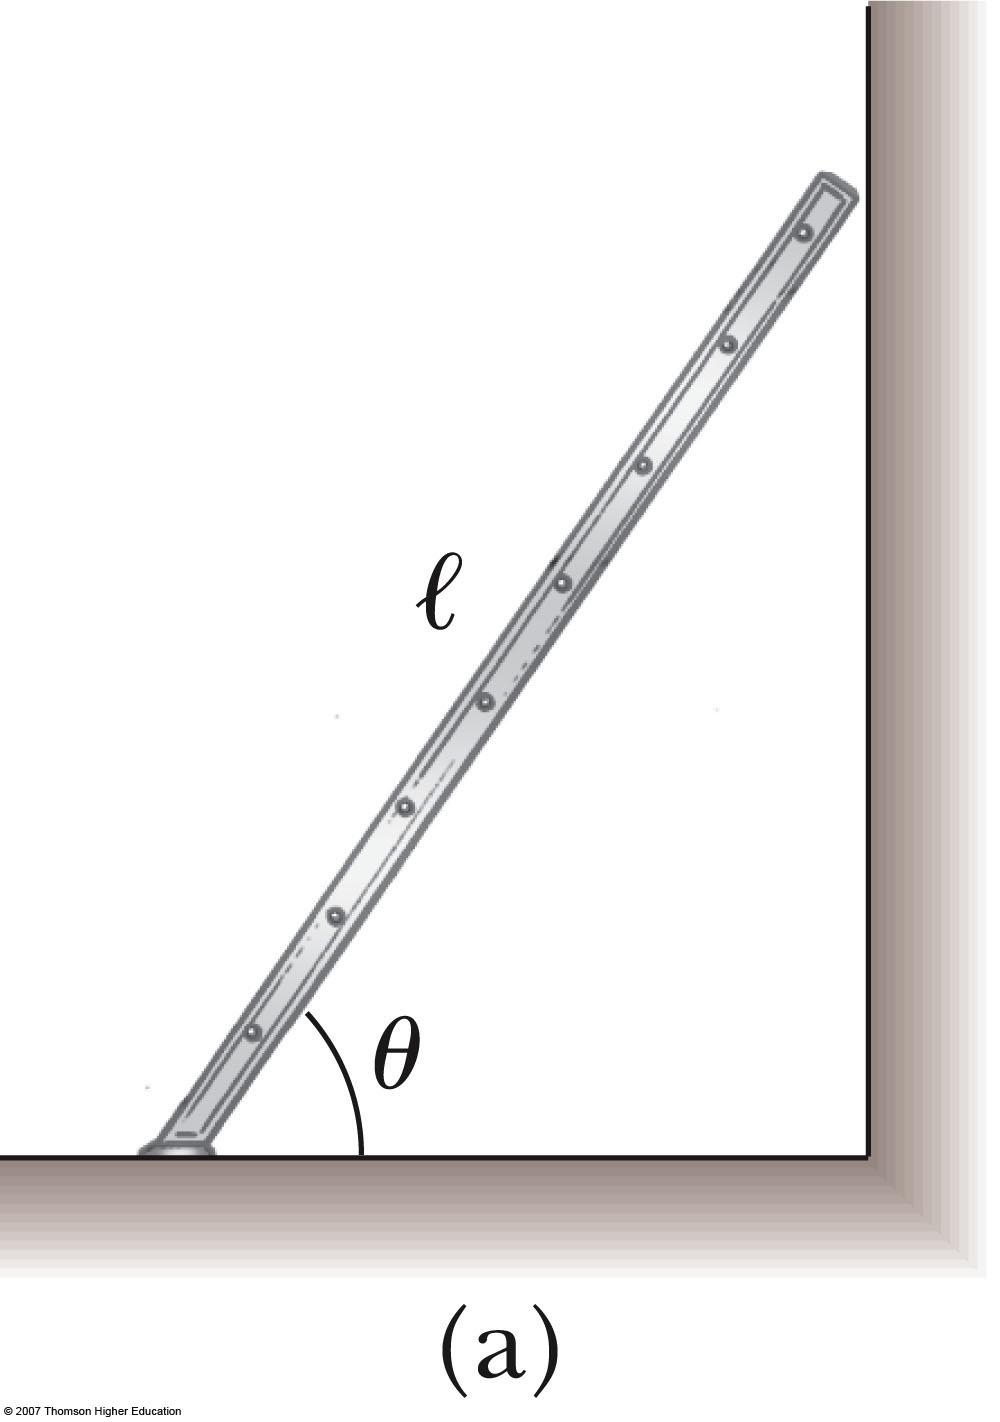 CG of a Ladder q A uniform ladder of length l rests against a smooth, vertical wall.